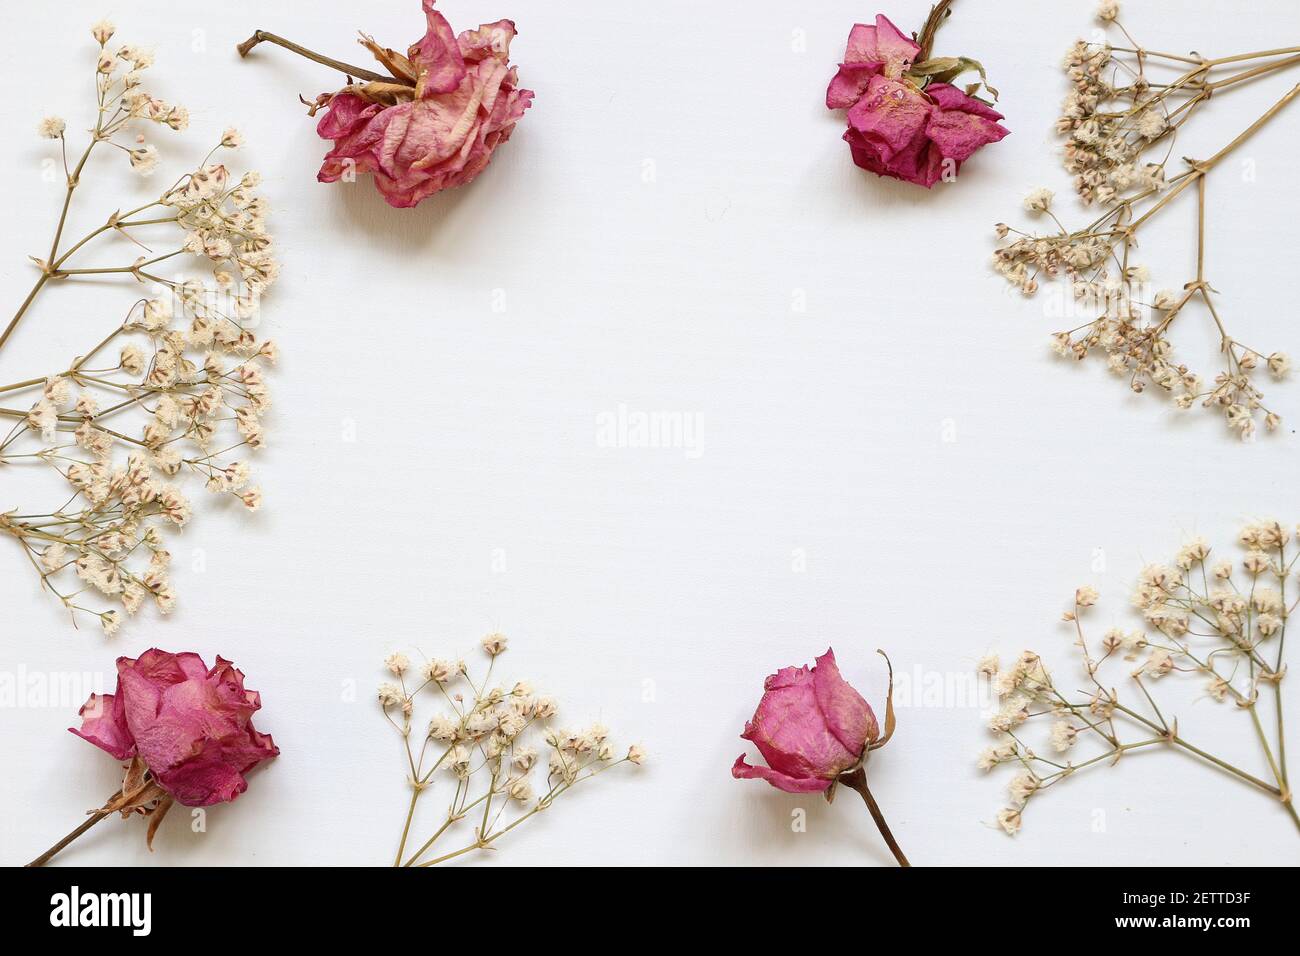 a frame of pink roses dried flowers Stock Photo